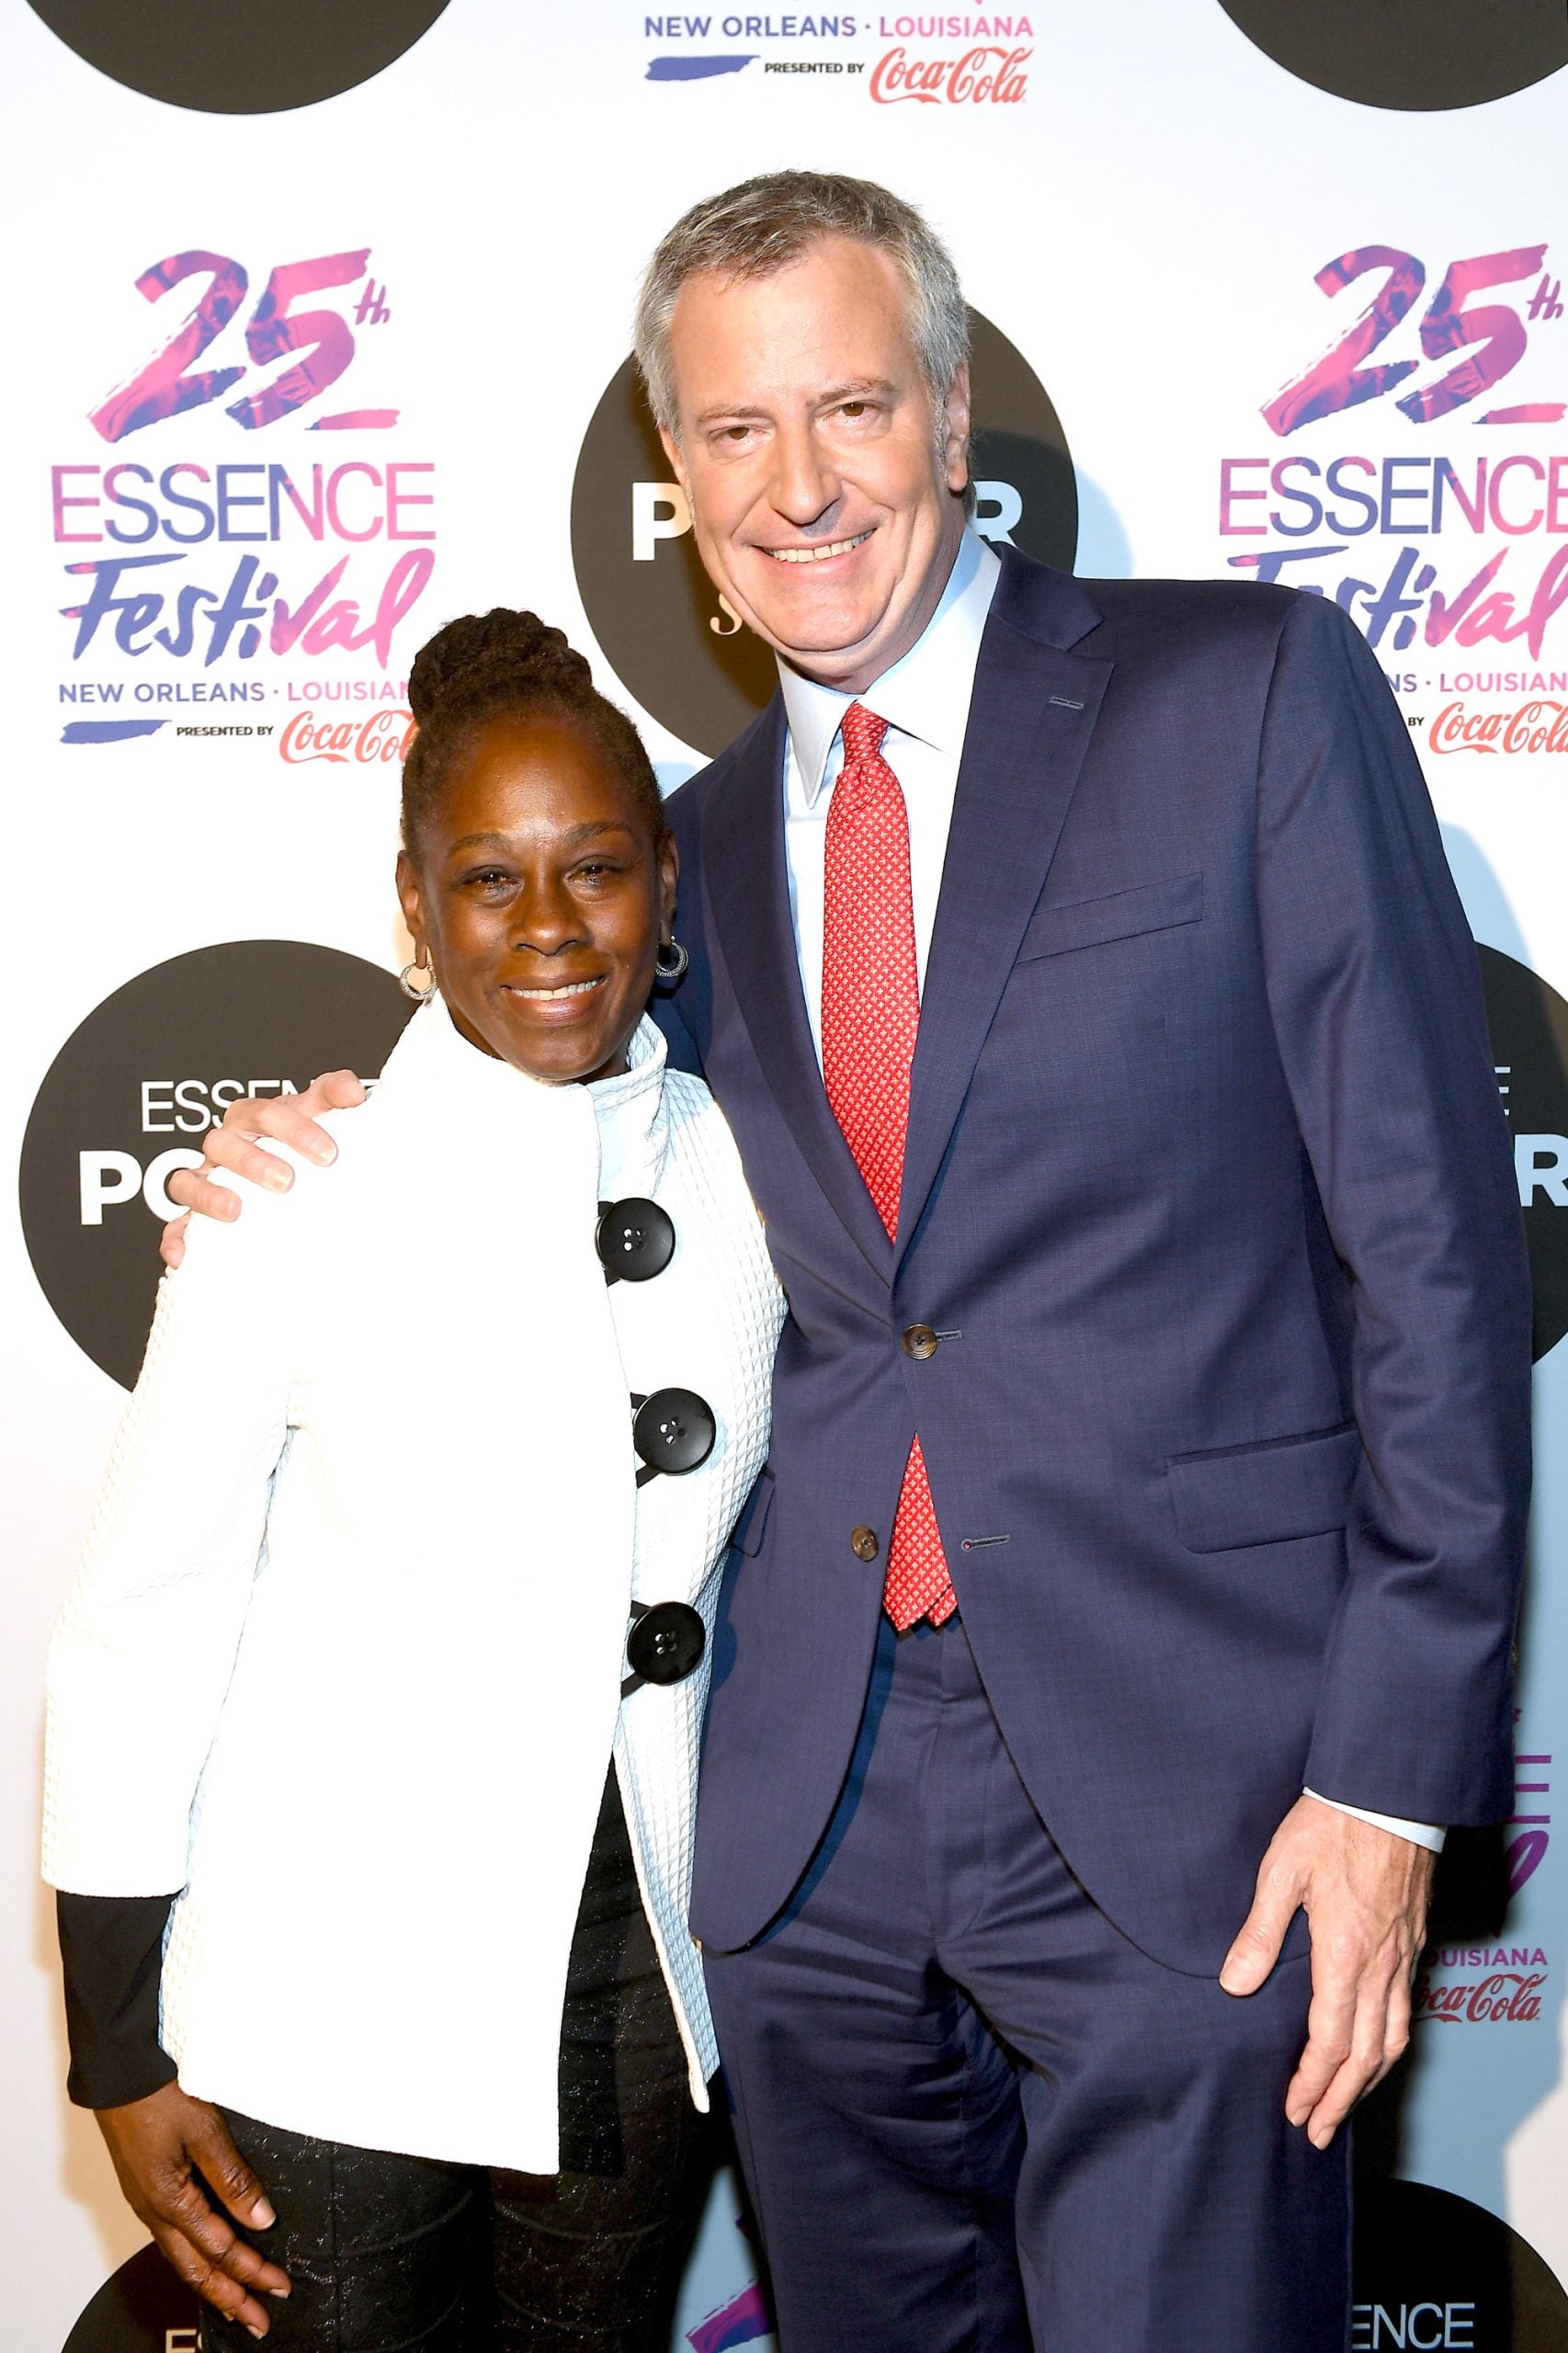 8 Times The Former NYC Mayor Bill de Blasio And His Wife Showcased Their Love